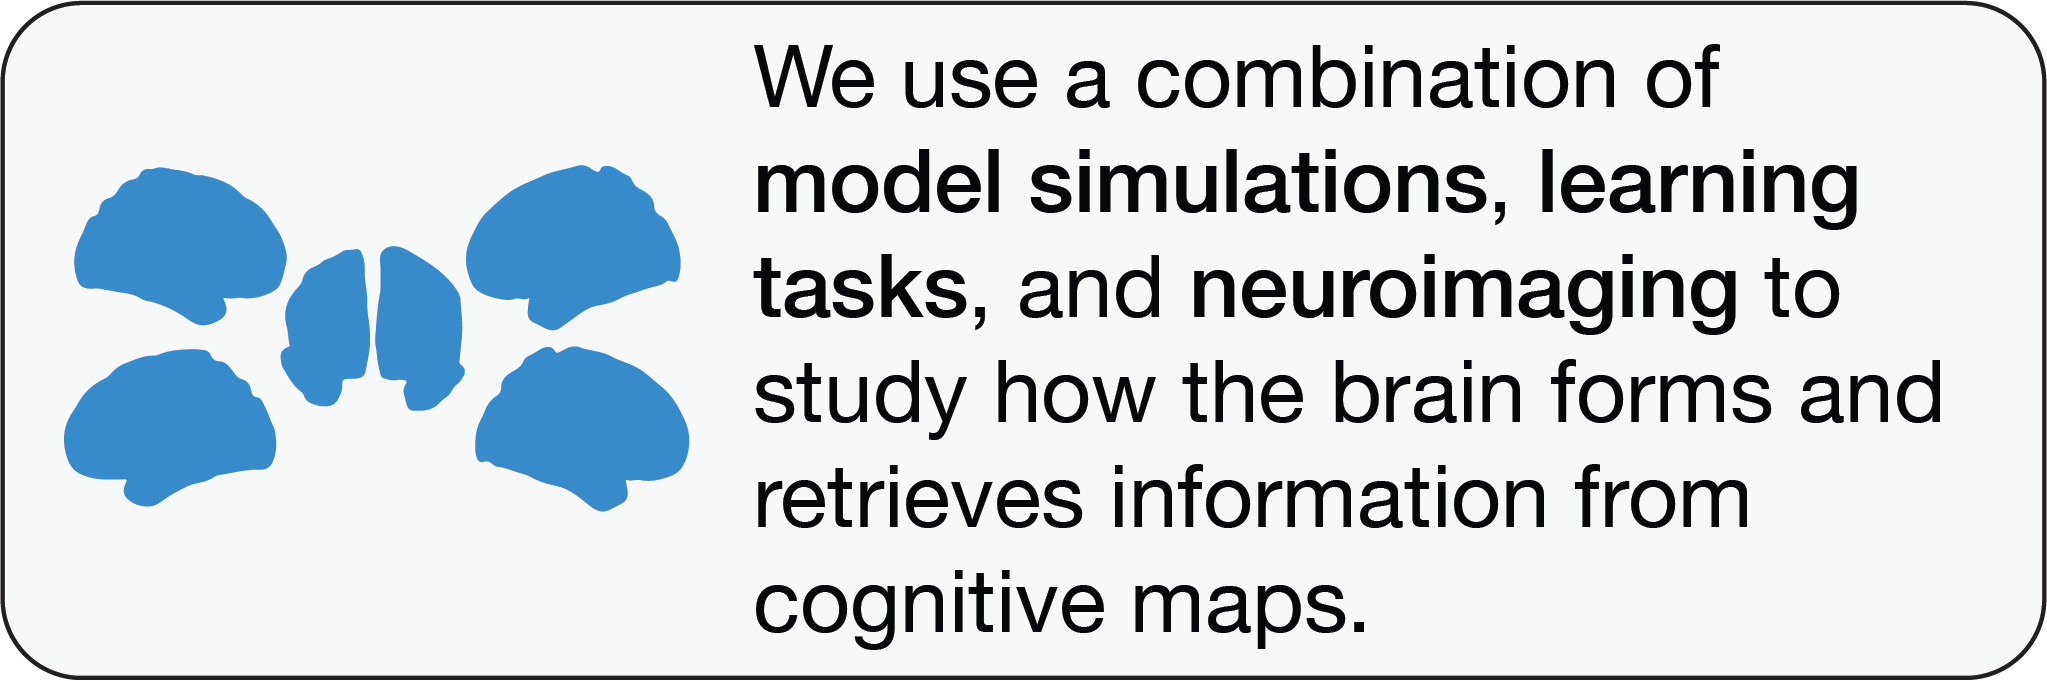 We use a combination of model simulations, learning task, and neuroimaging to study how the brain forms and retrieves information from cognitive maps.